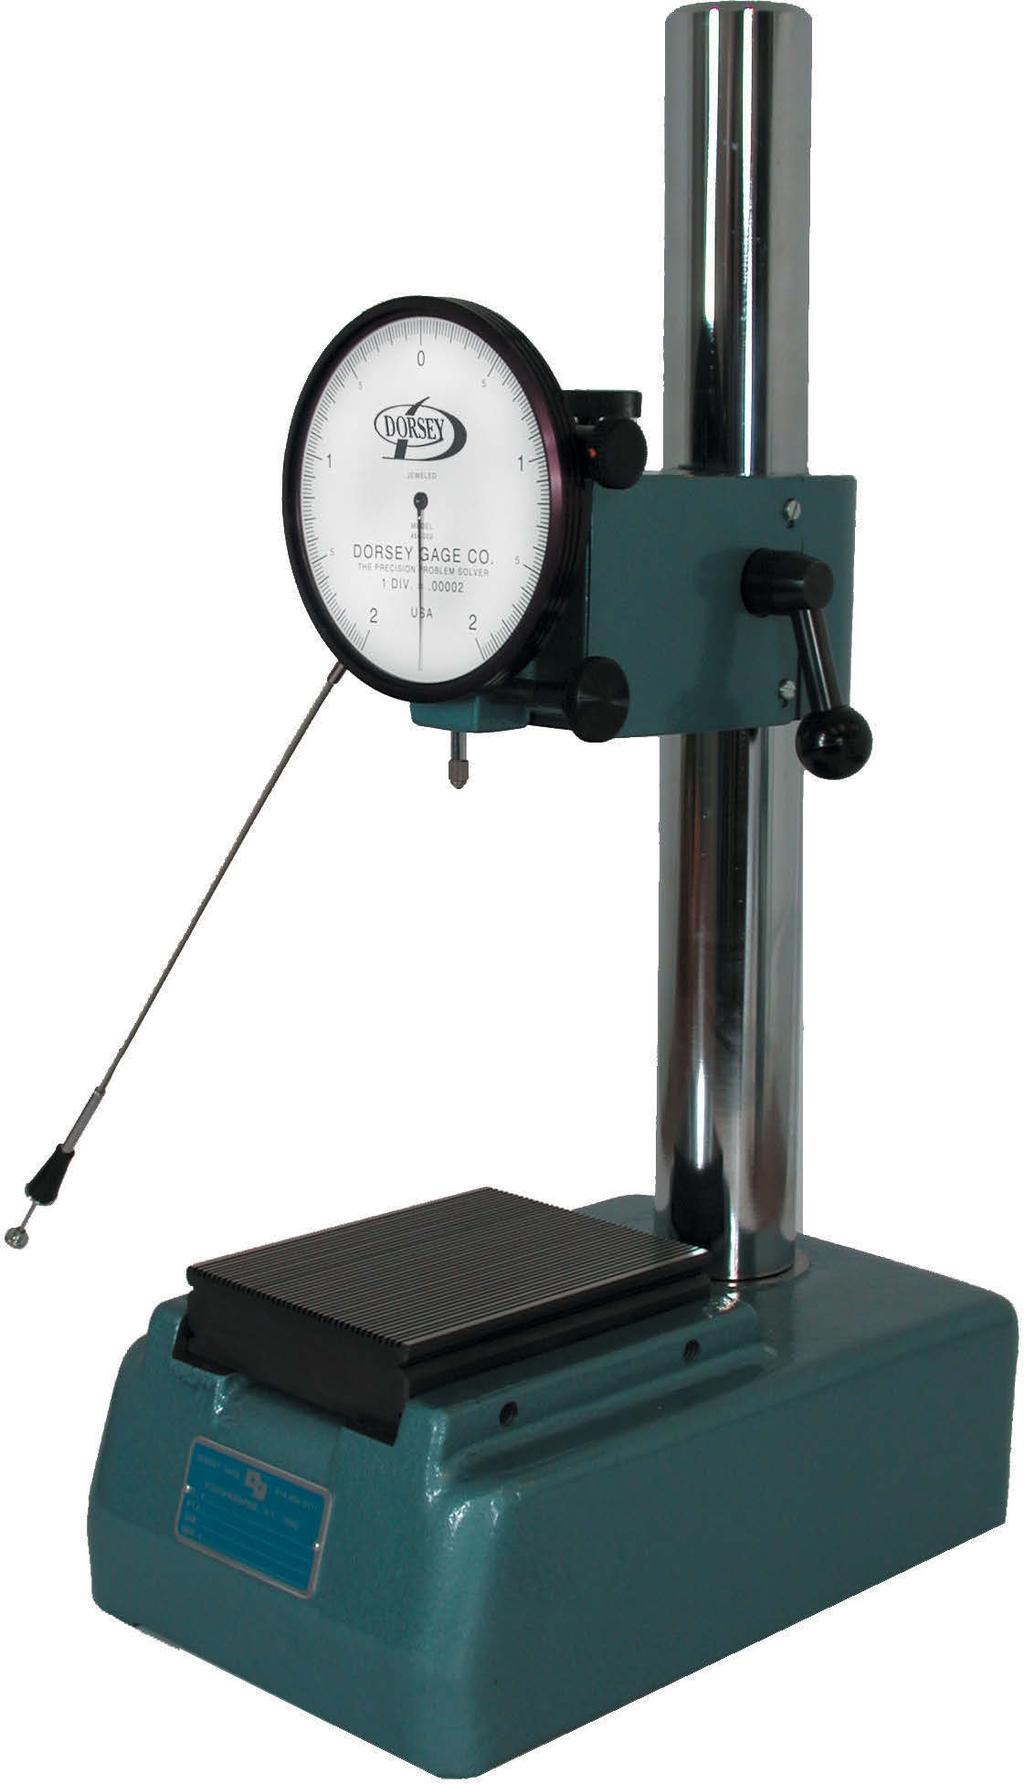 S3 Comparator Stand The S-3 precision comparator stand was designed for manufacturing areas requiring high accuracy, such as grinding and inspection departments.